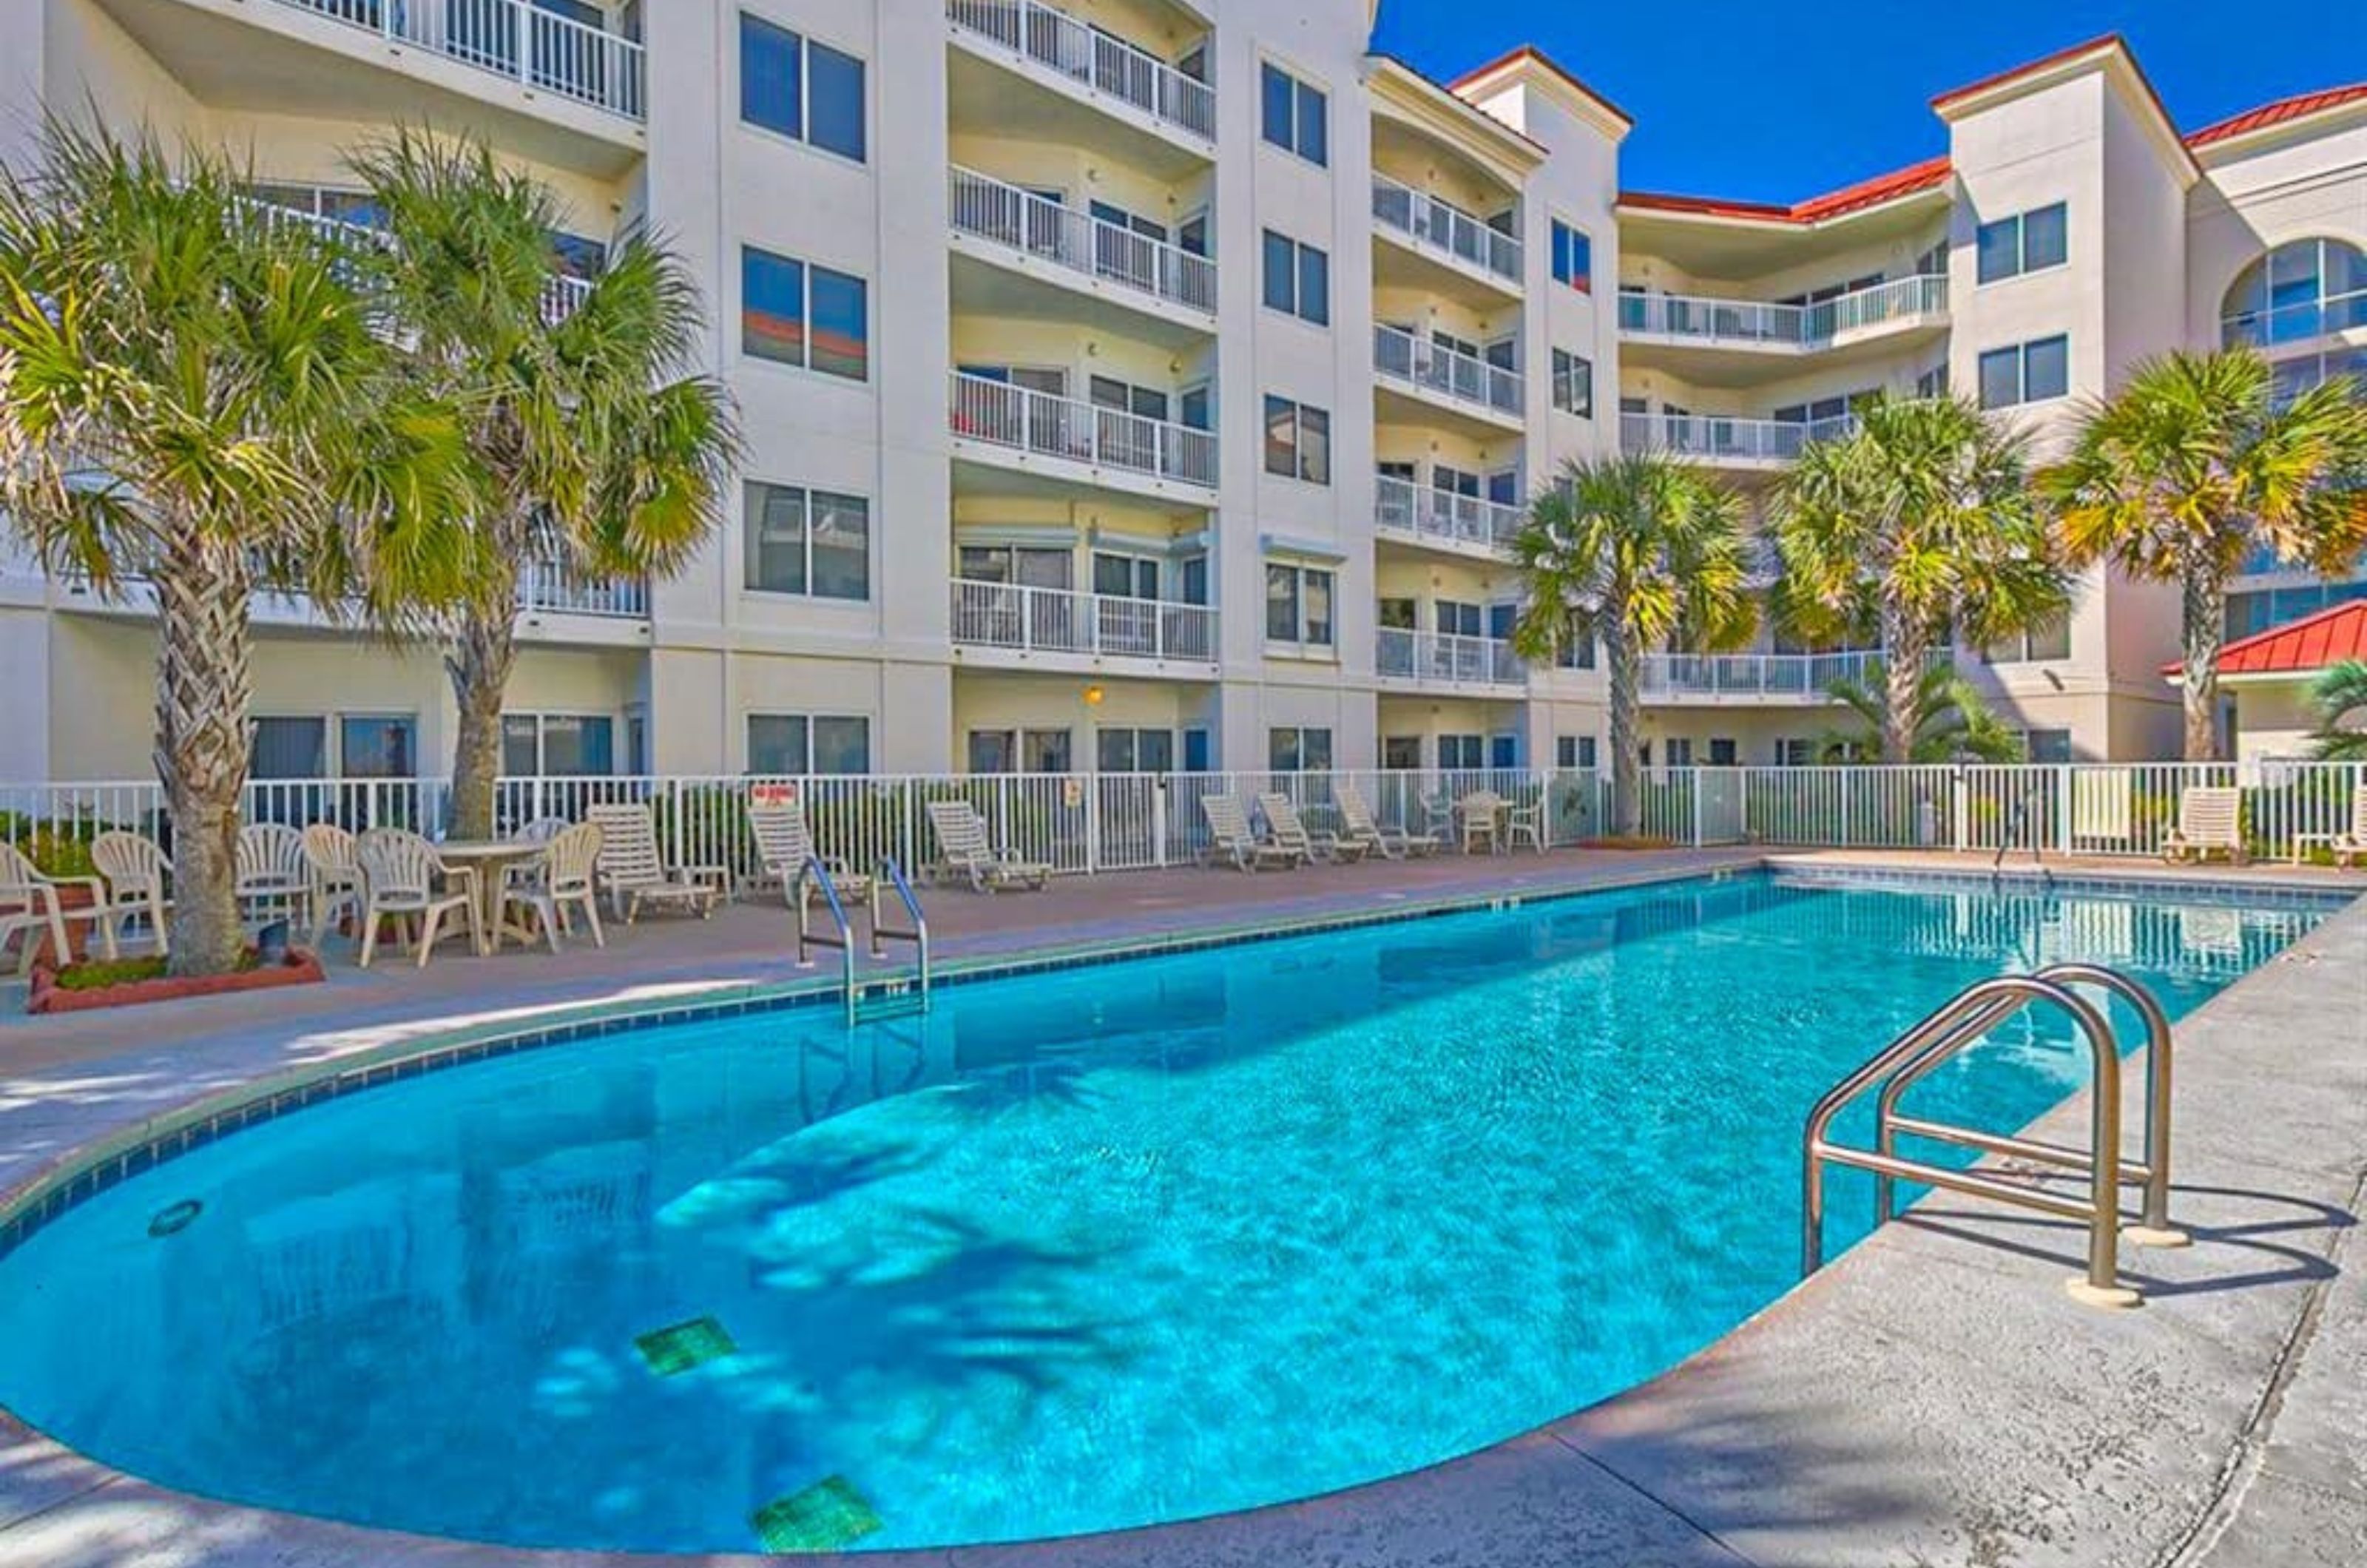 The outdoor swimming pool in front of Palm Beach Condos in Orange Beach Alabama